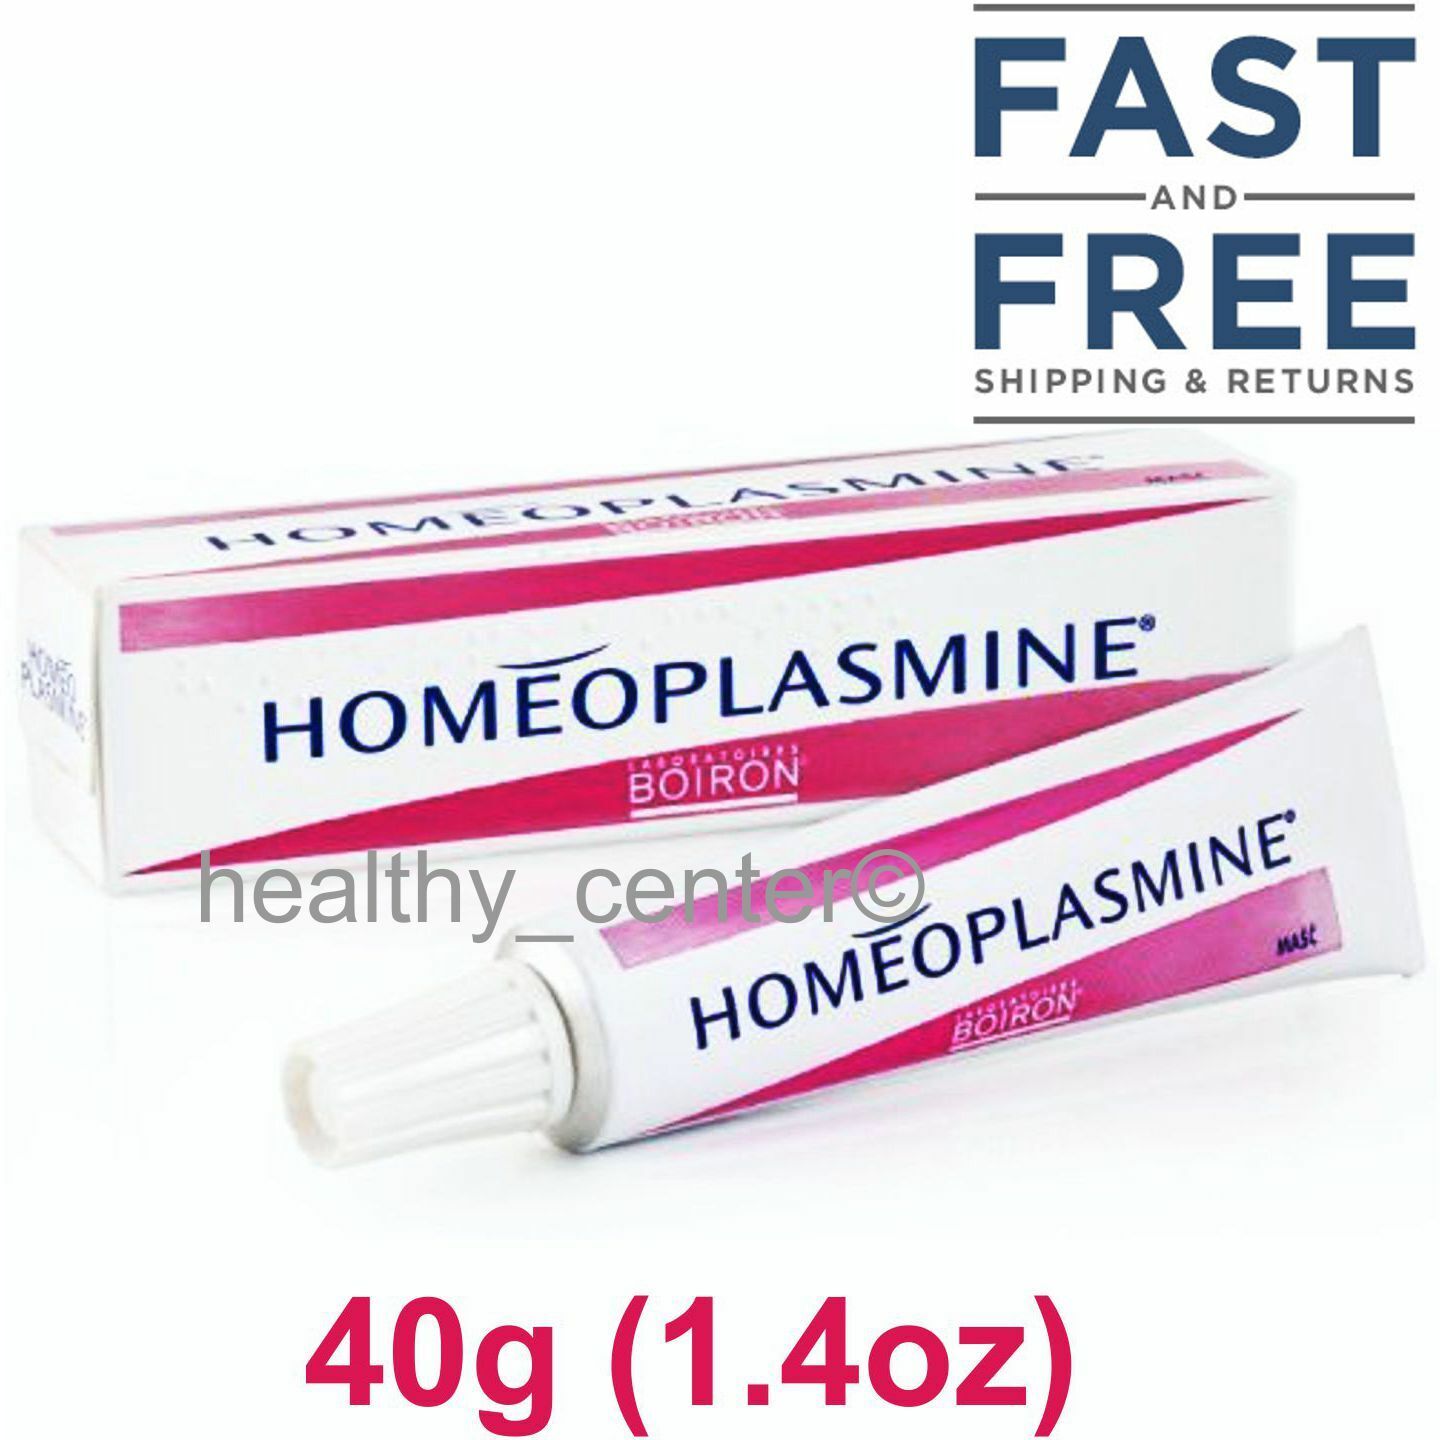 Boiron HOMEOPLASMINE Ointment 40g Large Tube US SELLER Exp. Date 07/2024